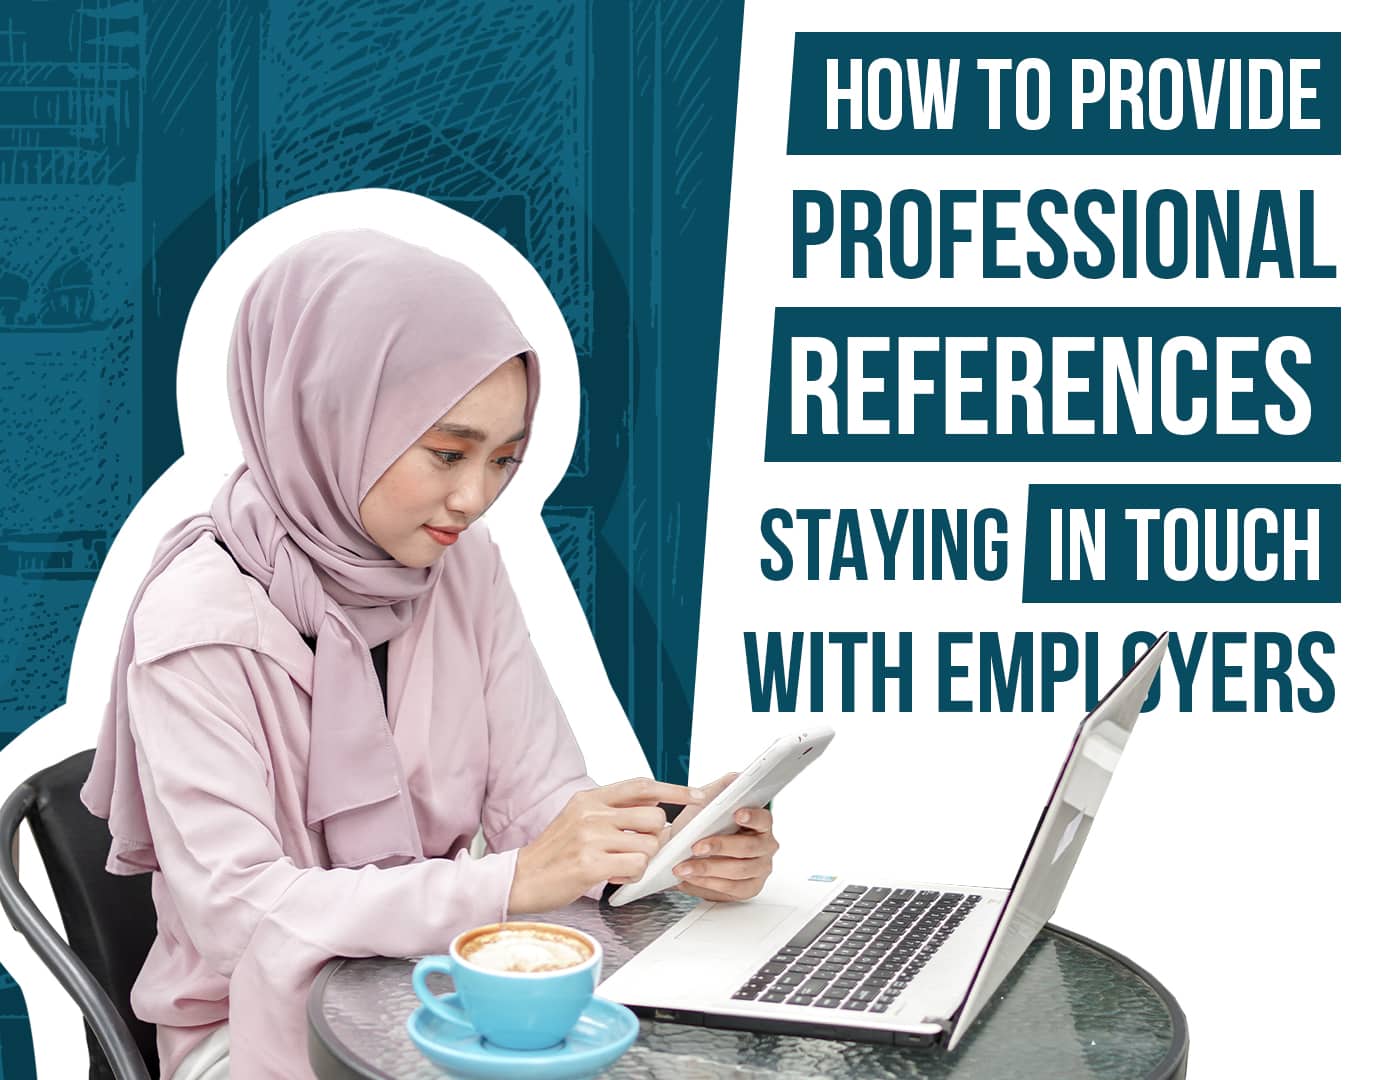 How To Provide Professional References